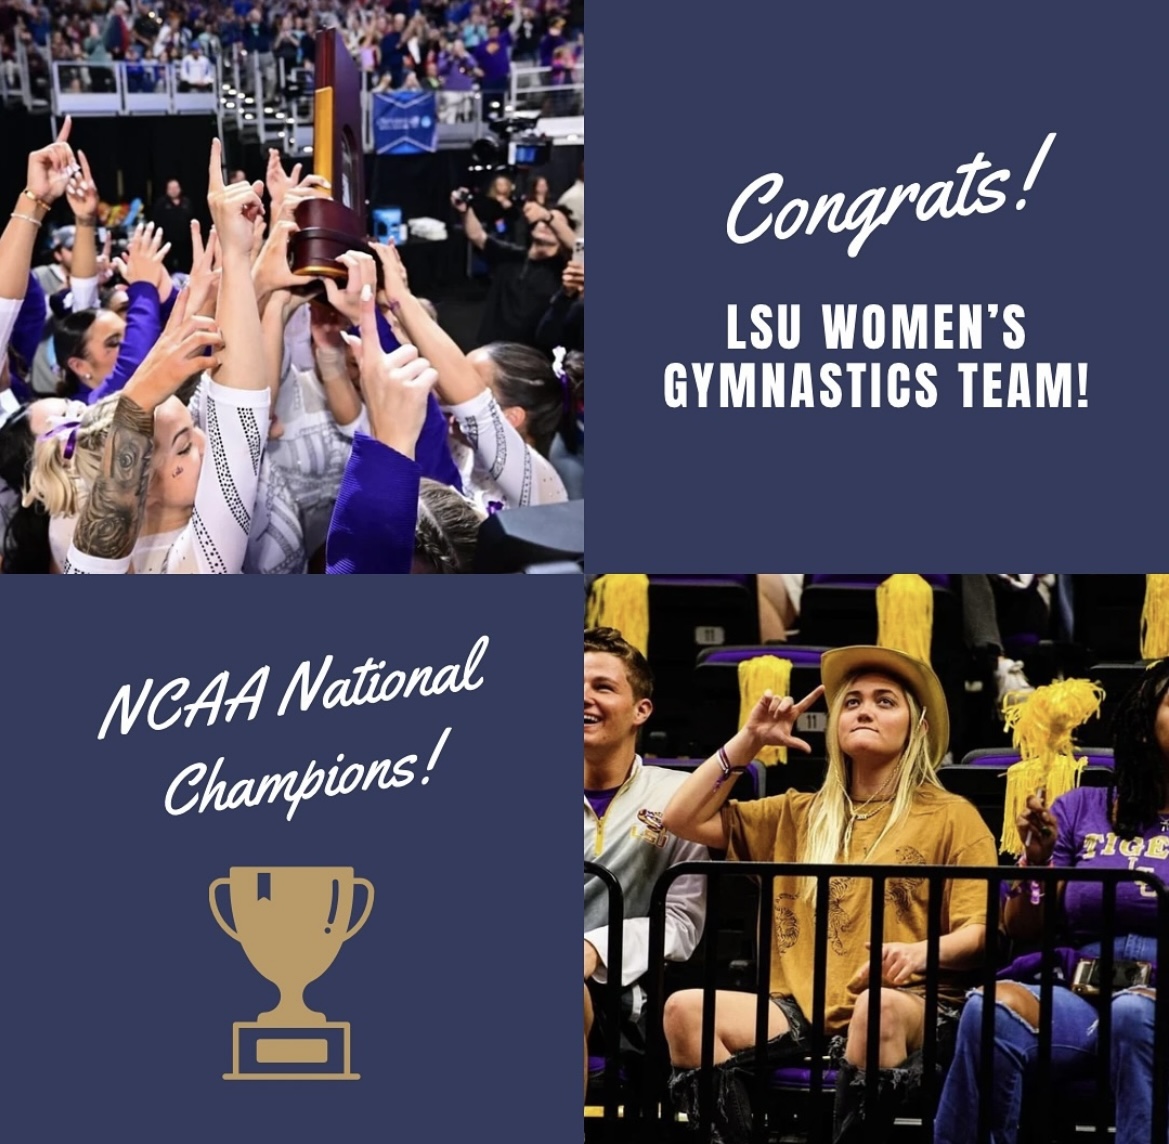 Congrats to the LSU Women's Gymnastics team who won the NCAA Championship last weekend. We know they couldn't have done it without their number one fan and our founding partner, @JulzDunne. She always brings the 🎉